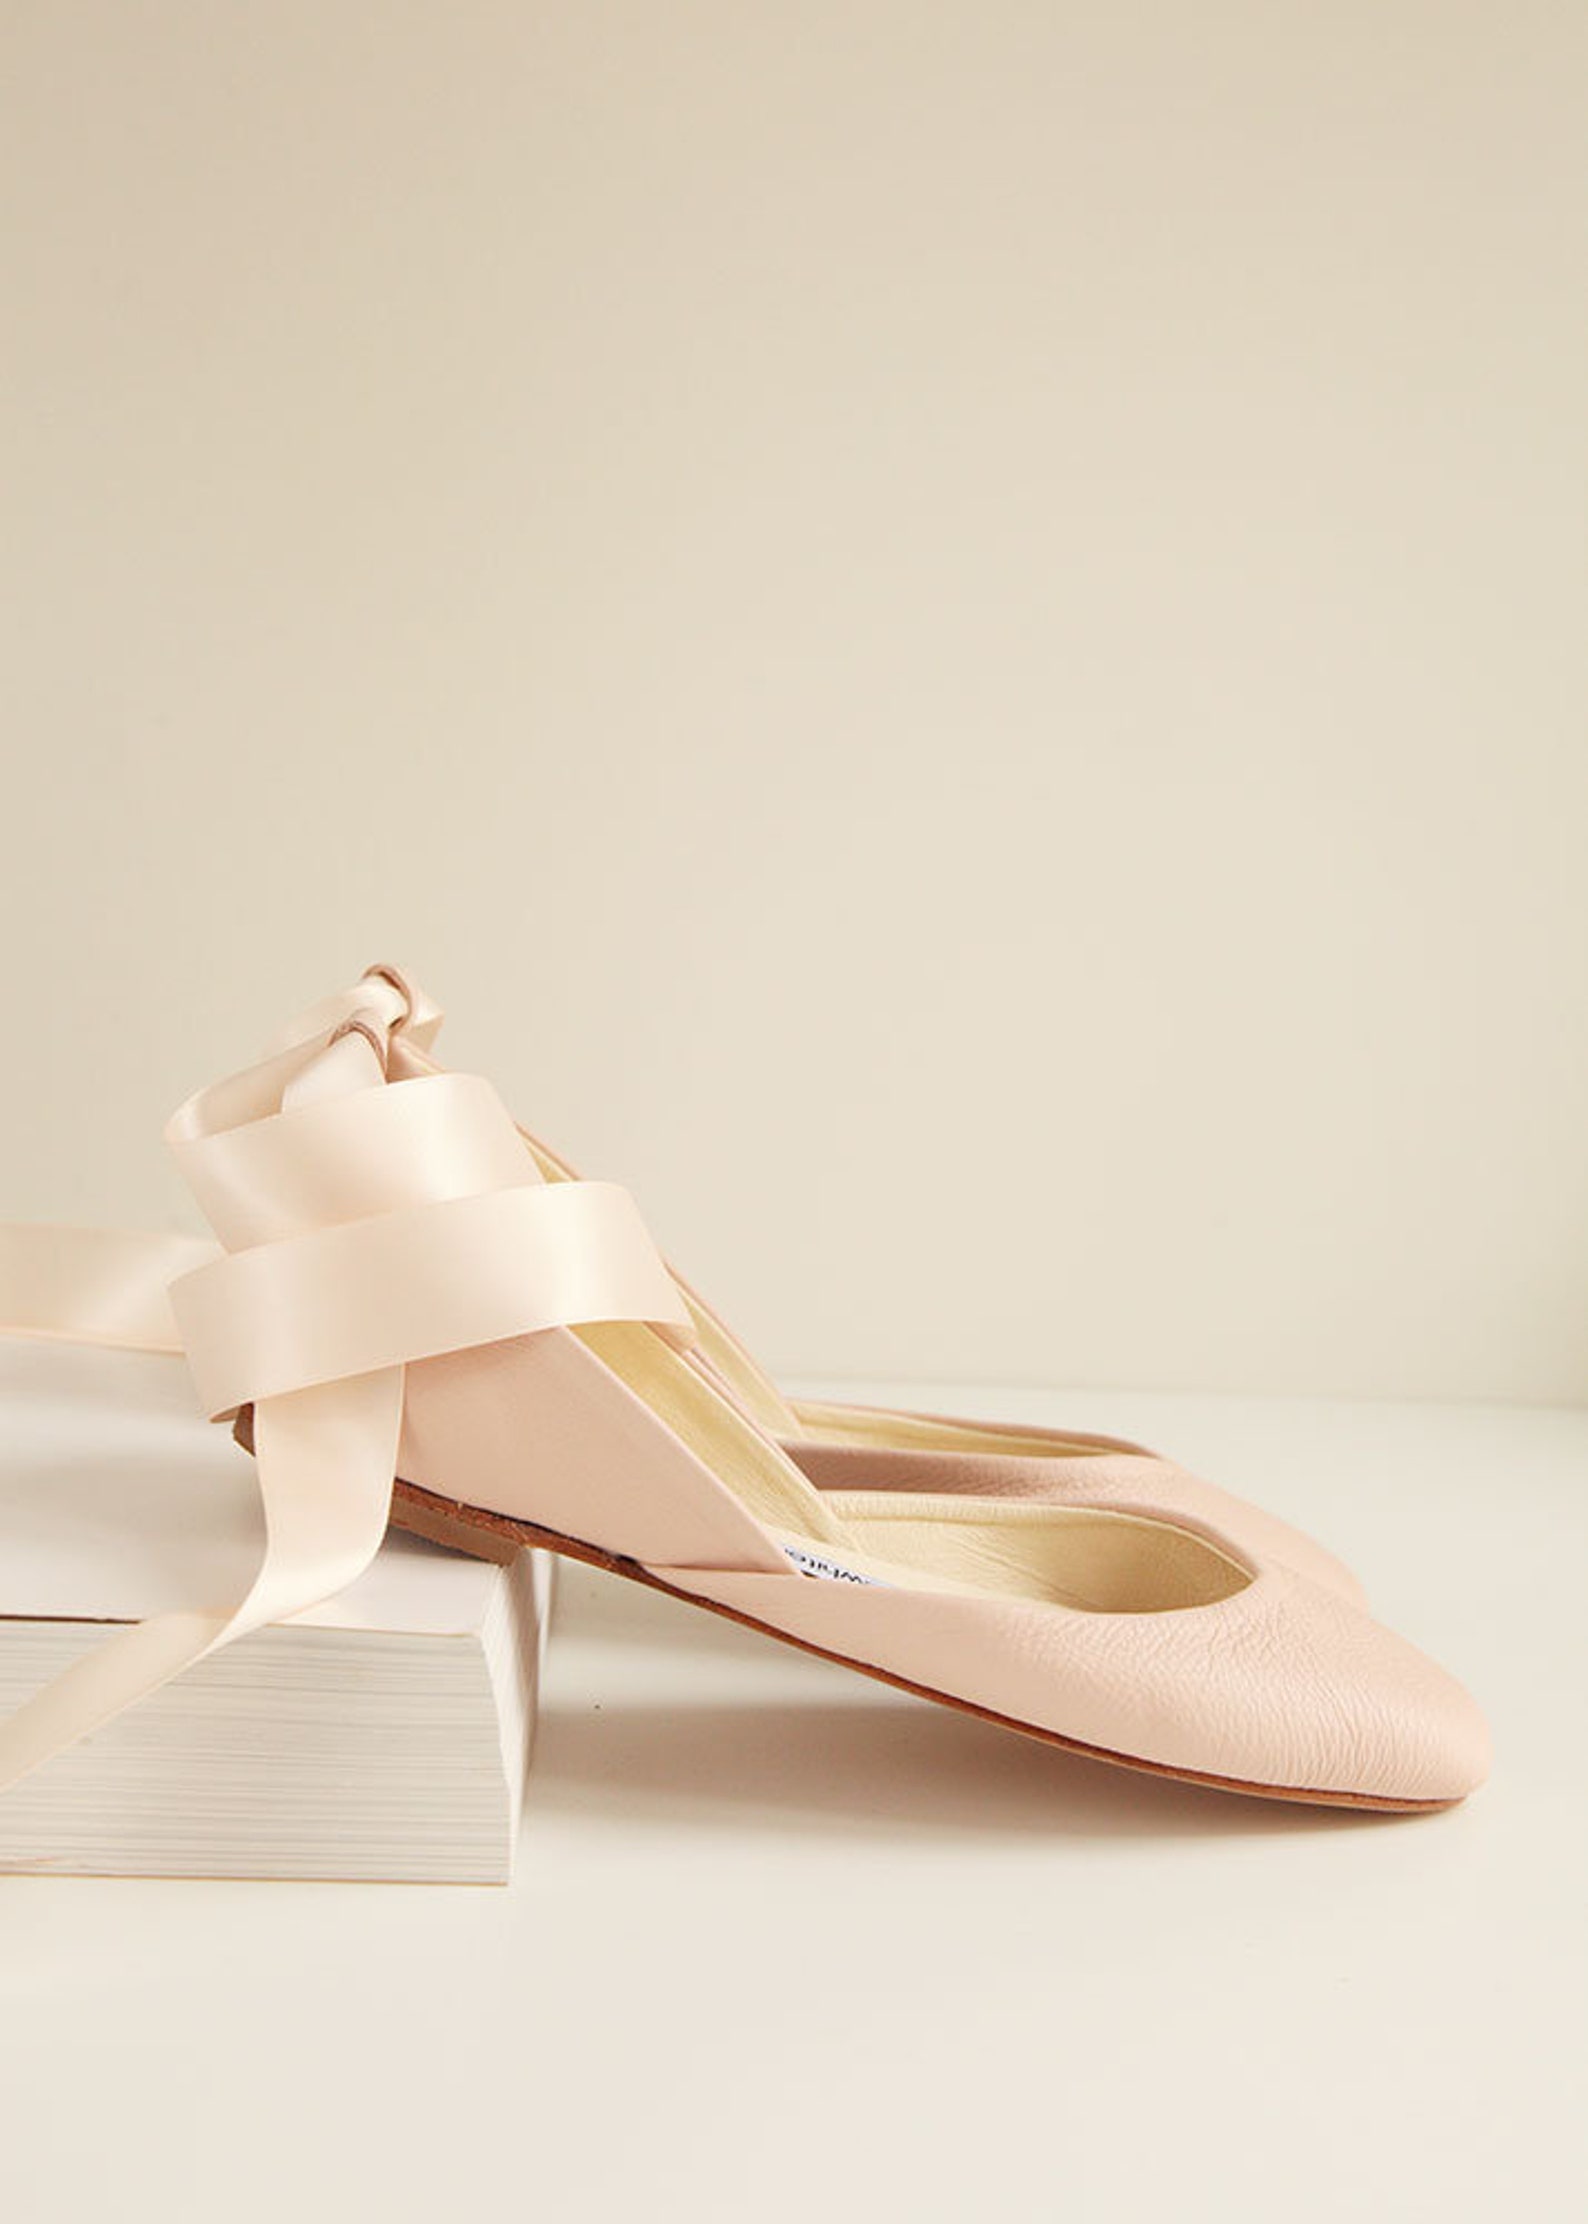 the nude blush wedding ballet flats | bridal leather shoes with satin ribbons | nude with satin ribbons | ready to ship